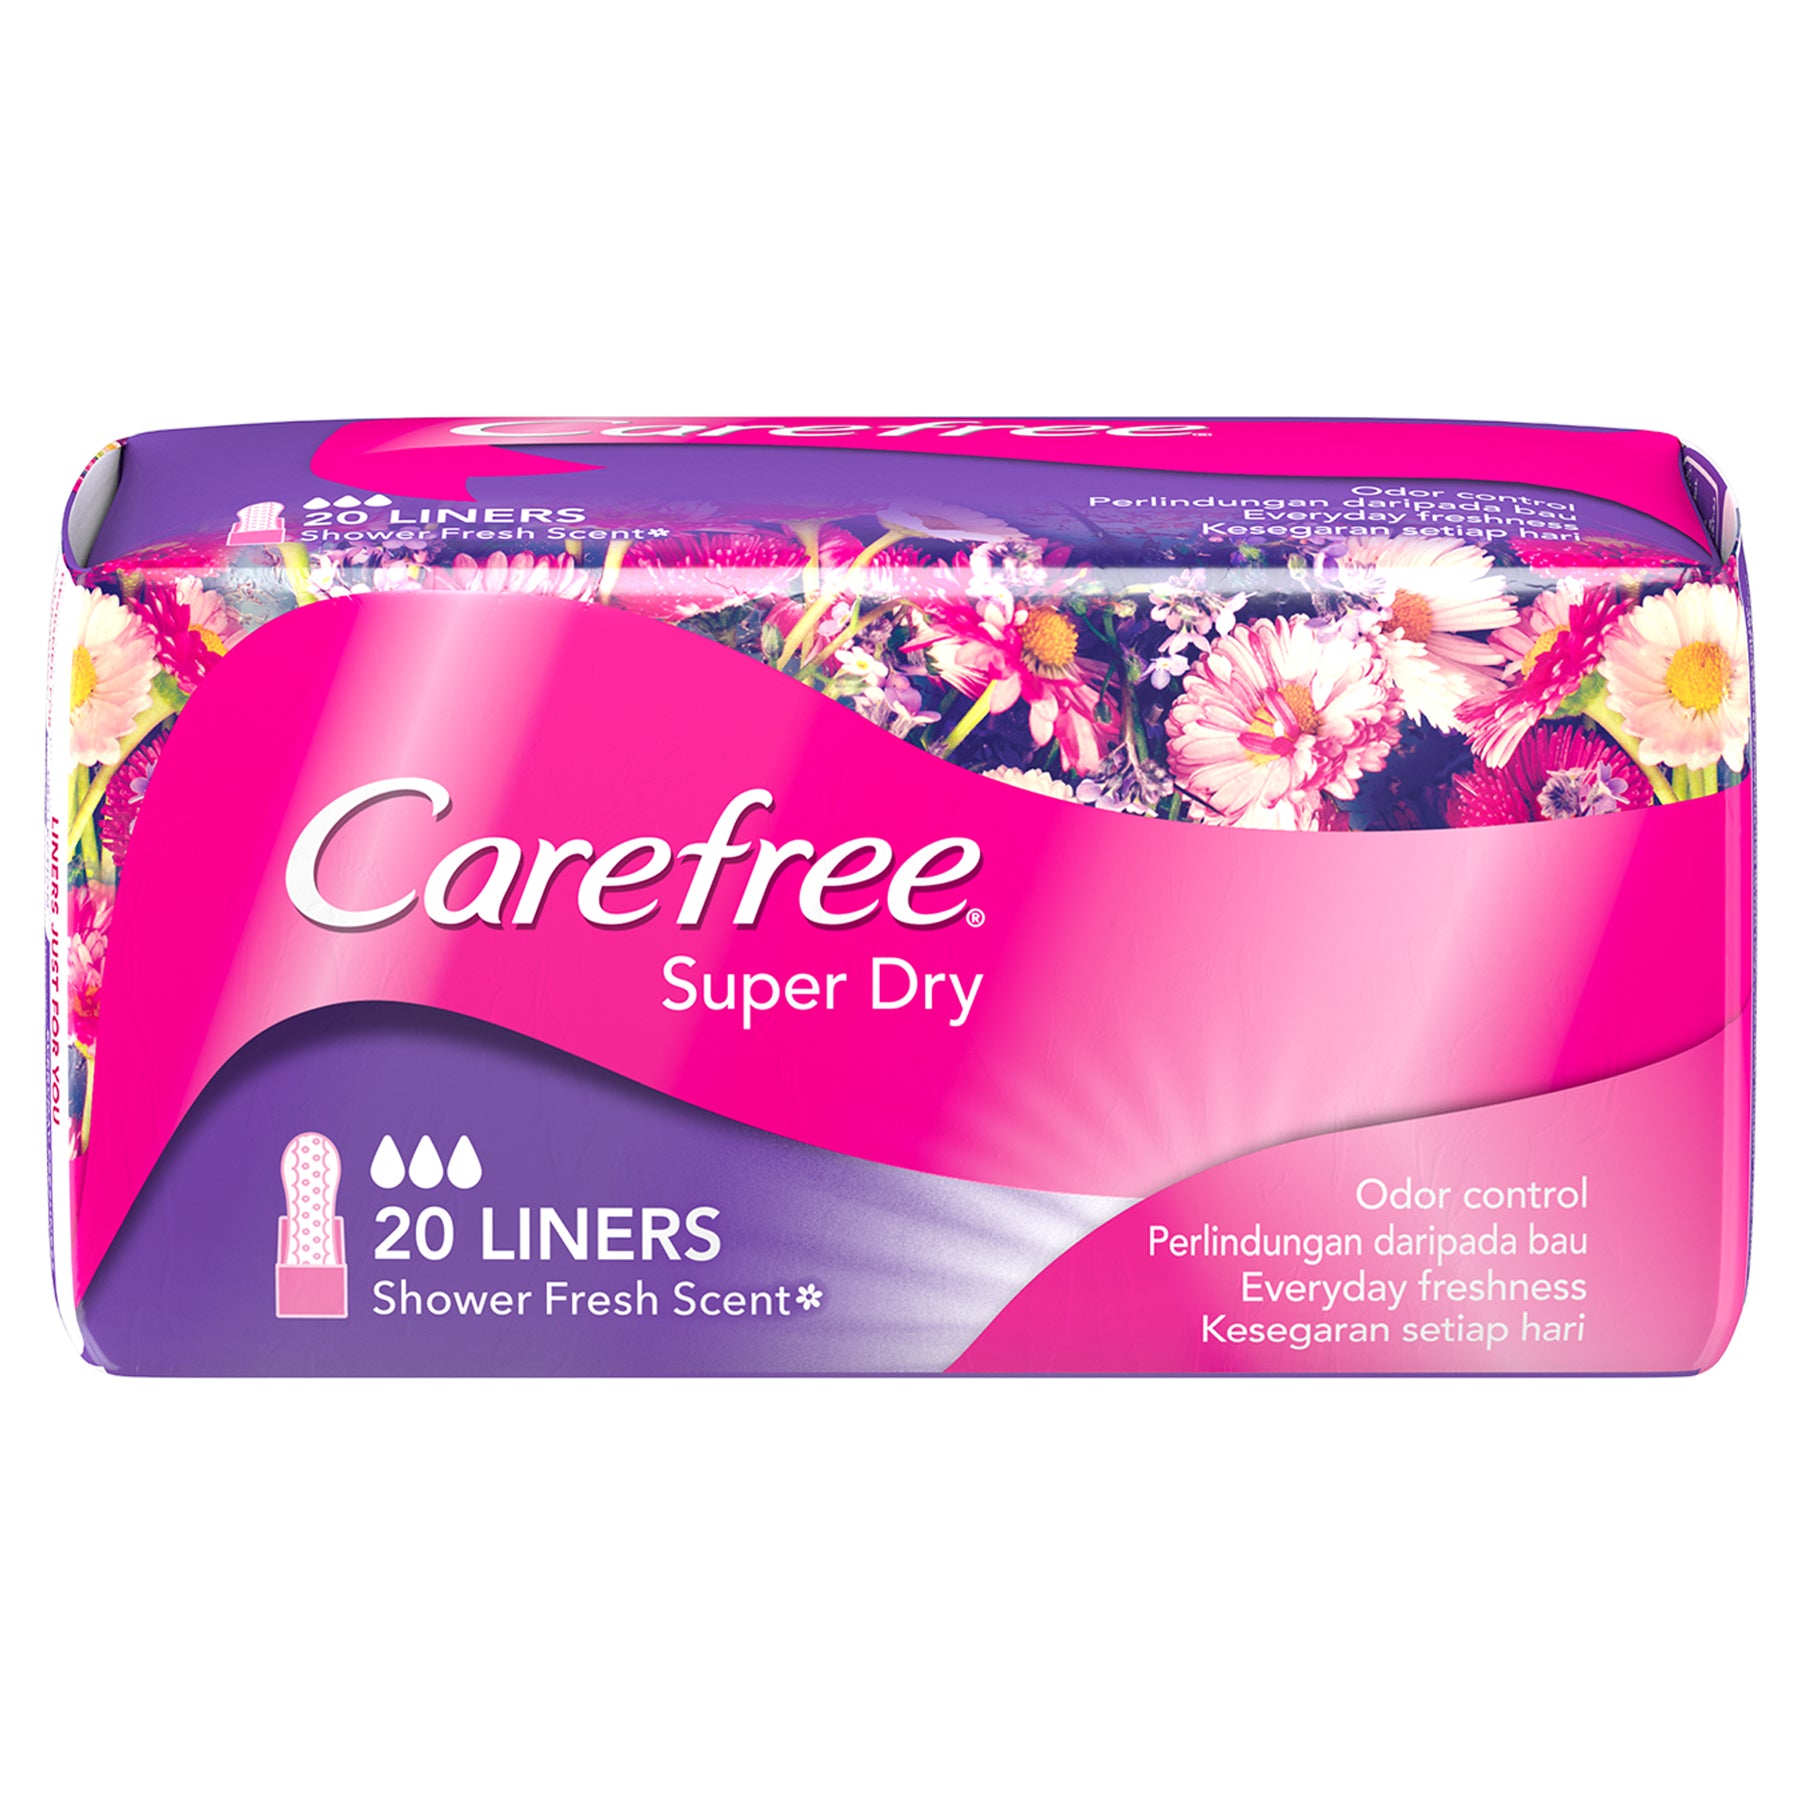 [PROMO] Carefree Super Dry Panty Liners 20s + Breathable 8s Value Pack